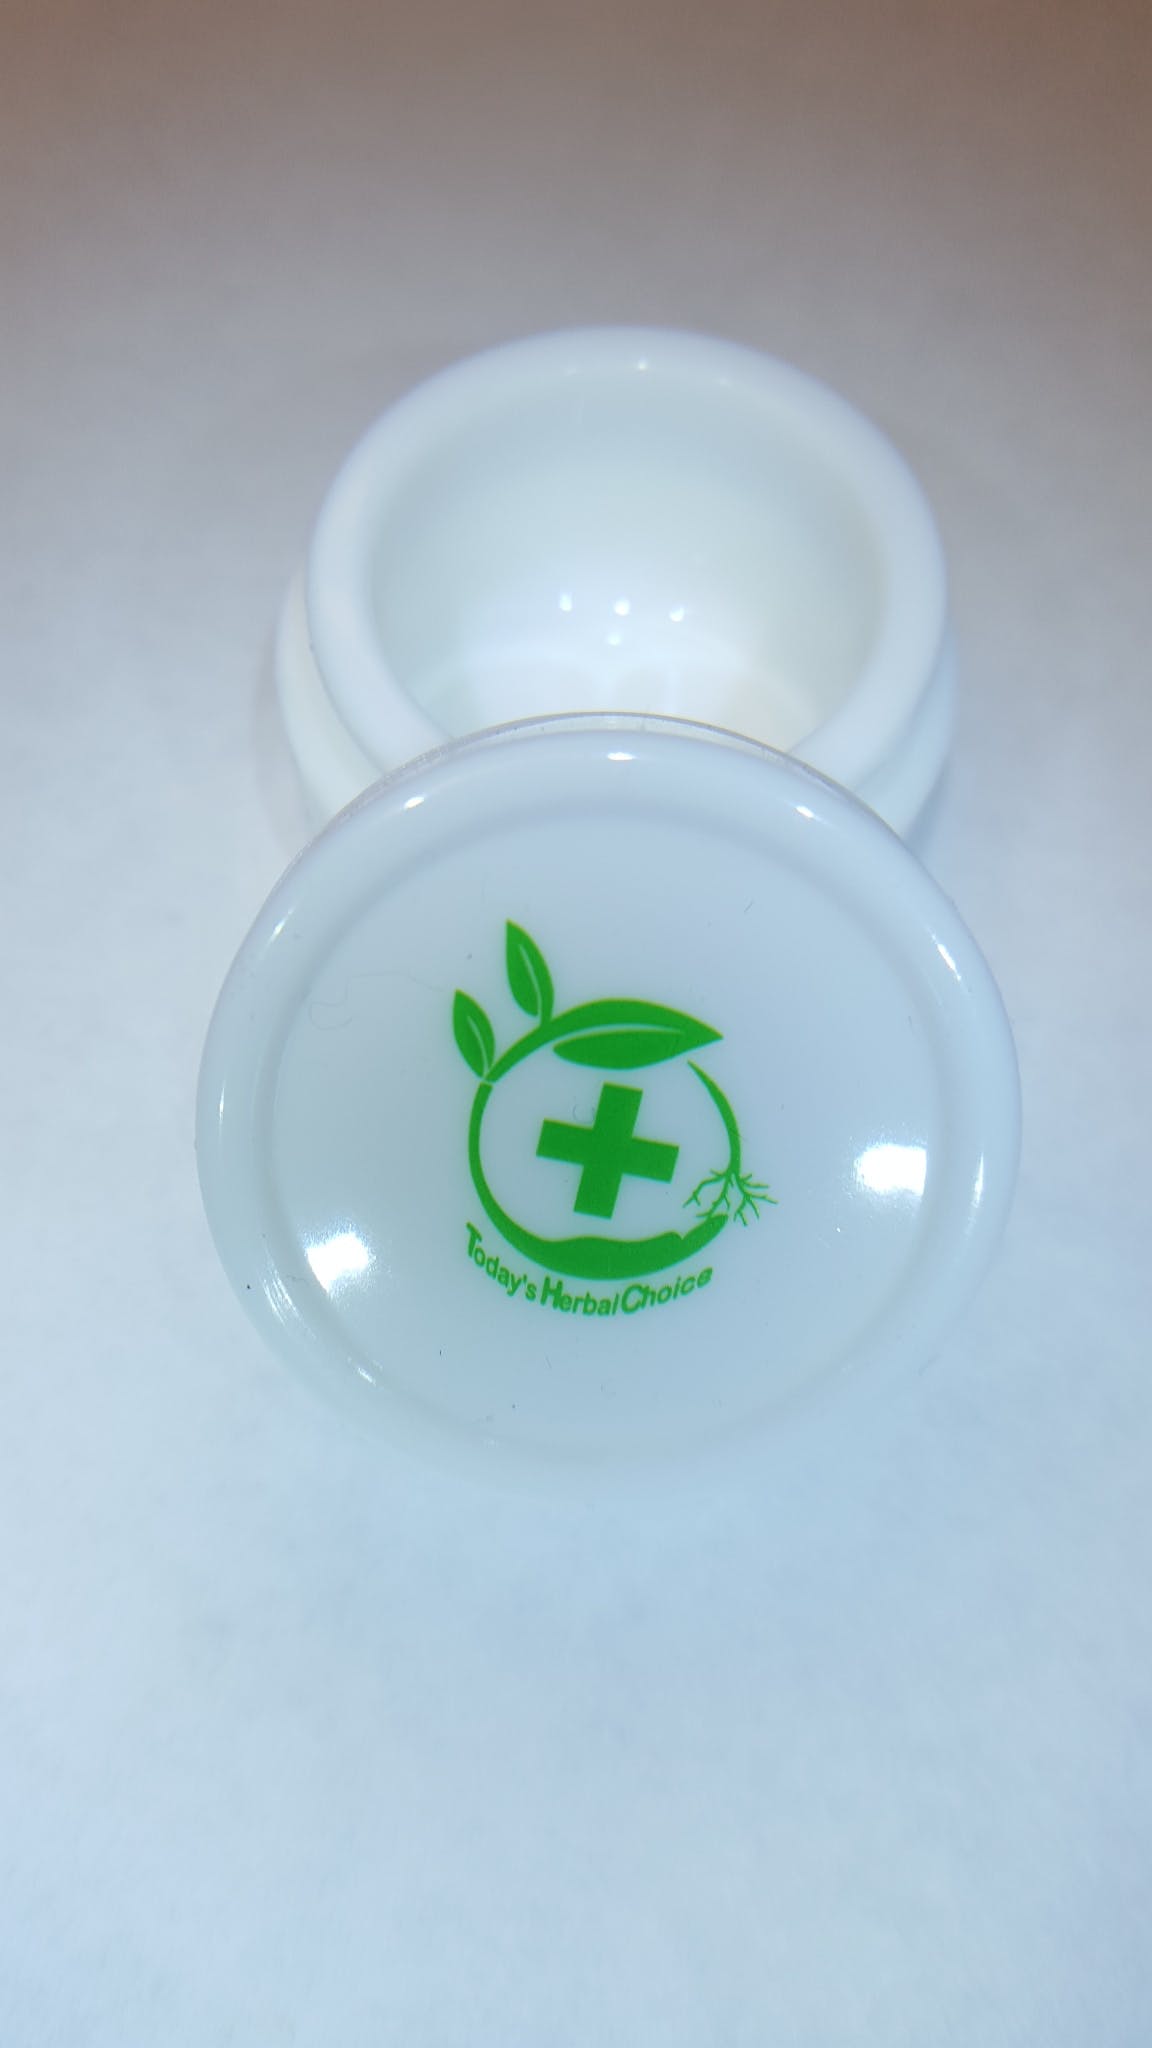 gear-thc-logo-7ml-silicone-container